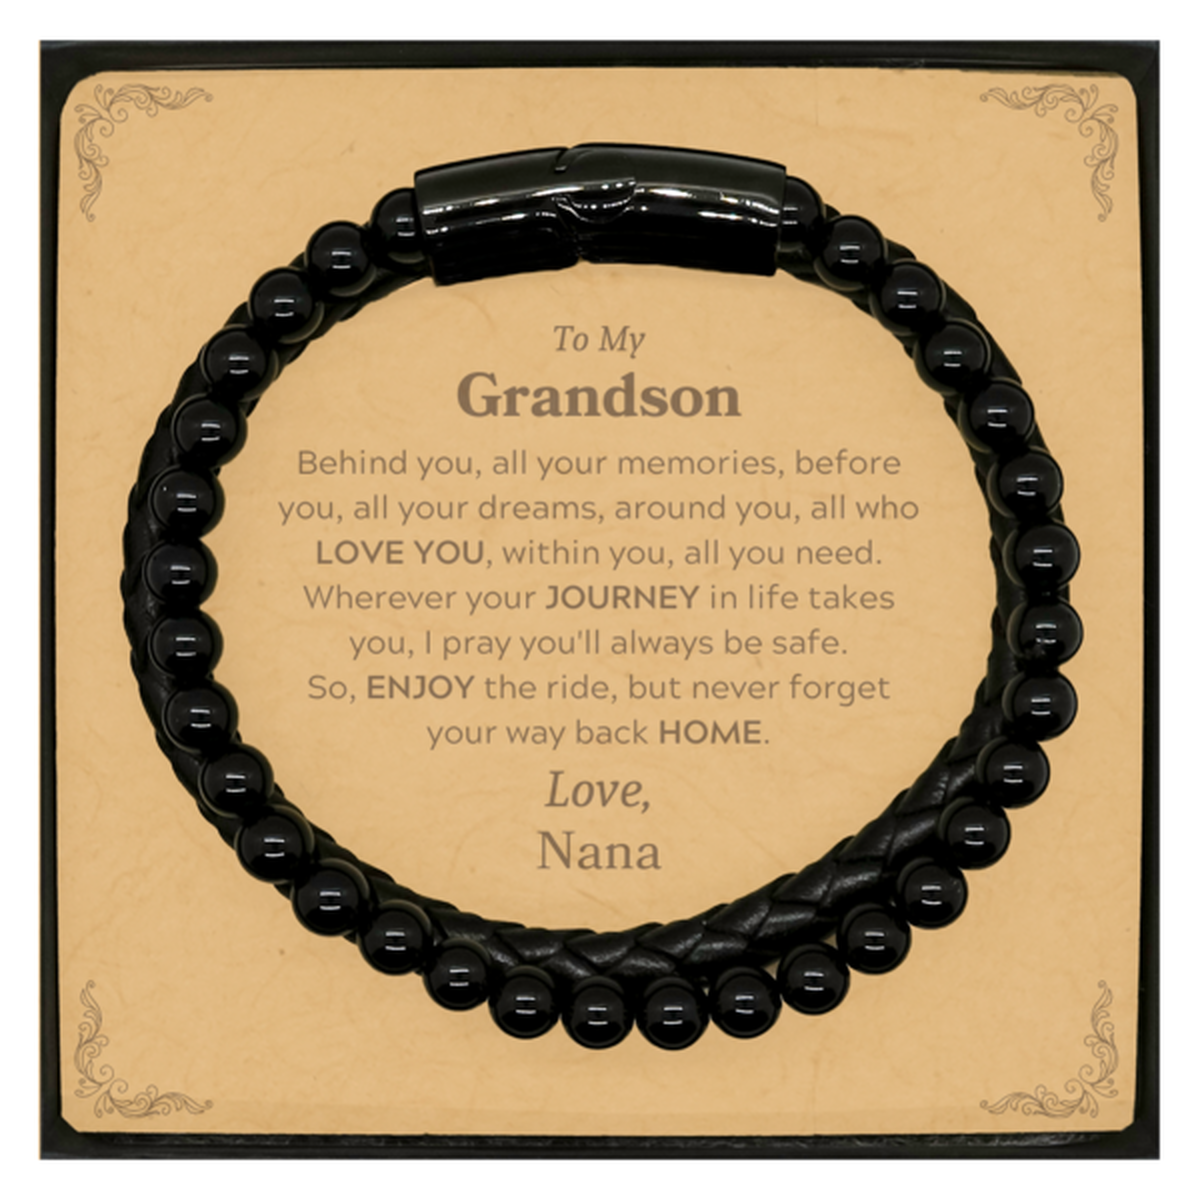 To My Grandson Graduation Gifts from Nana, Grandson Stone Leather Bracelets Christmas Birthday Gifts for Grandson Behind you, all your memories, before you, all your dreams. Love, Nana